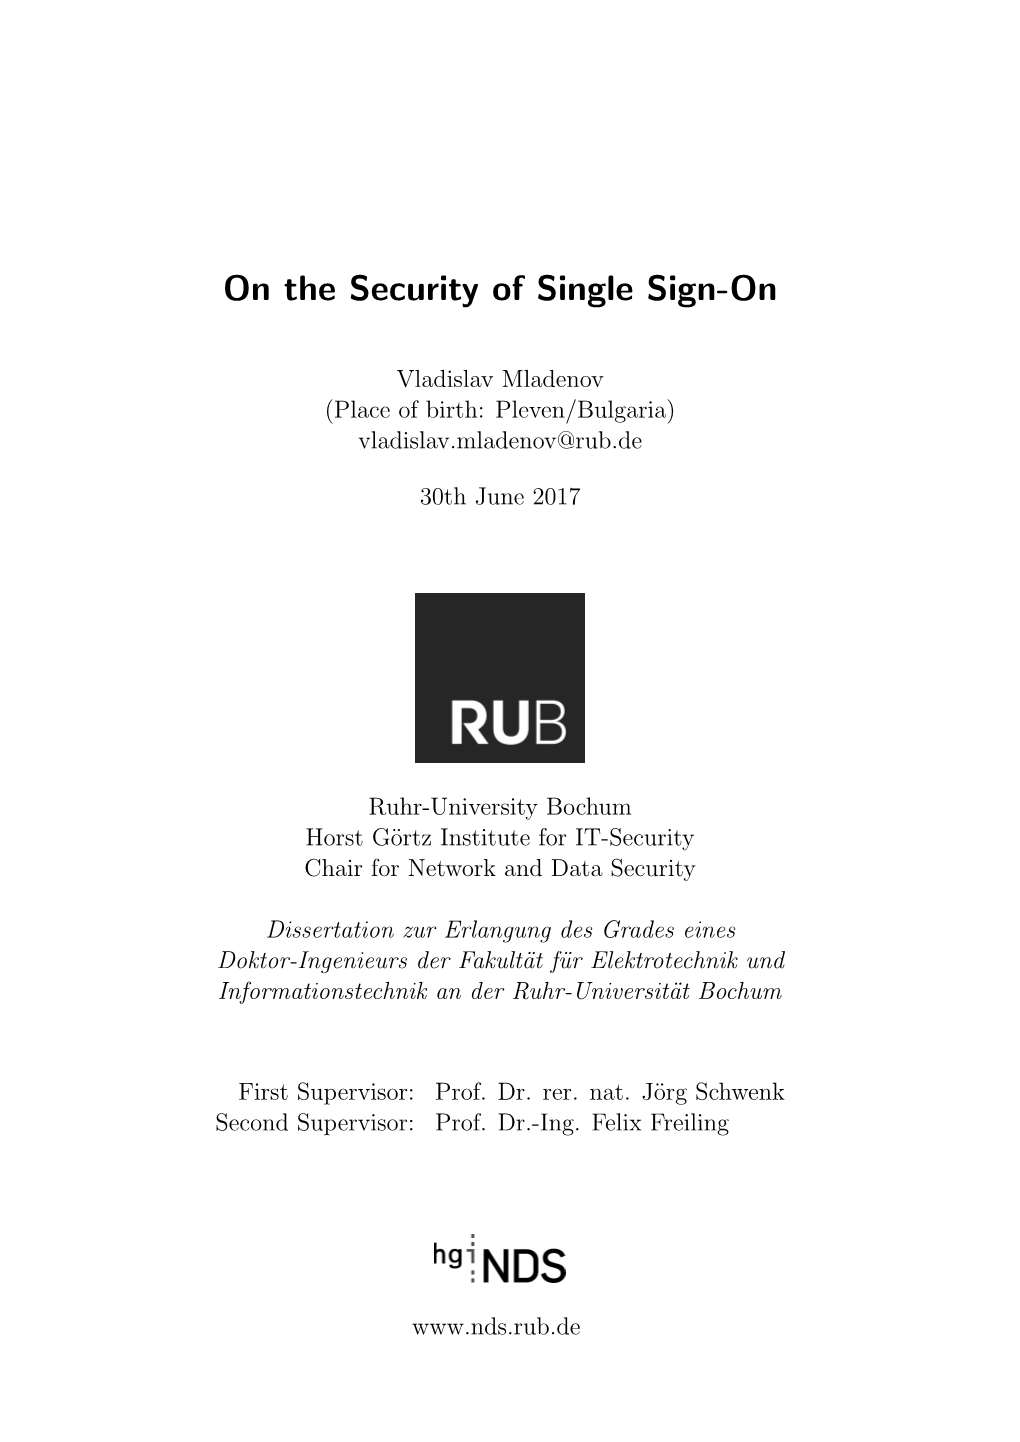 On the Security of Single Sign-On